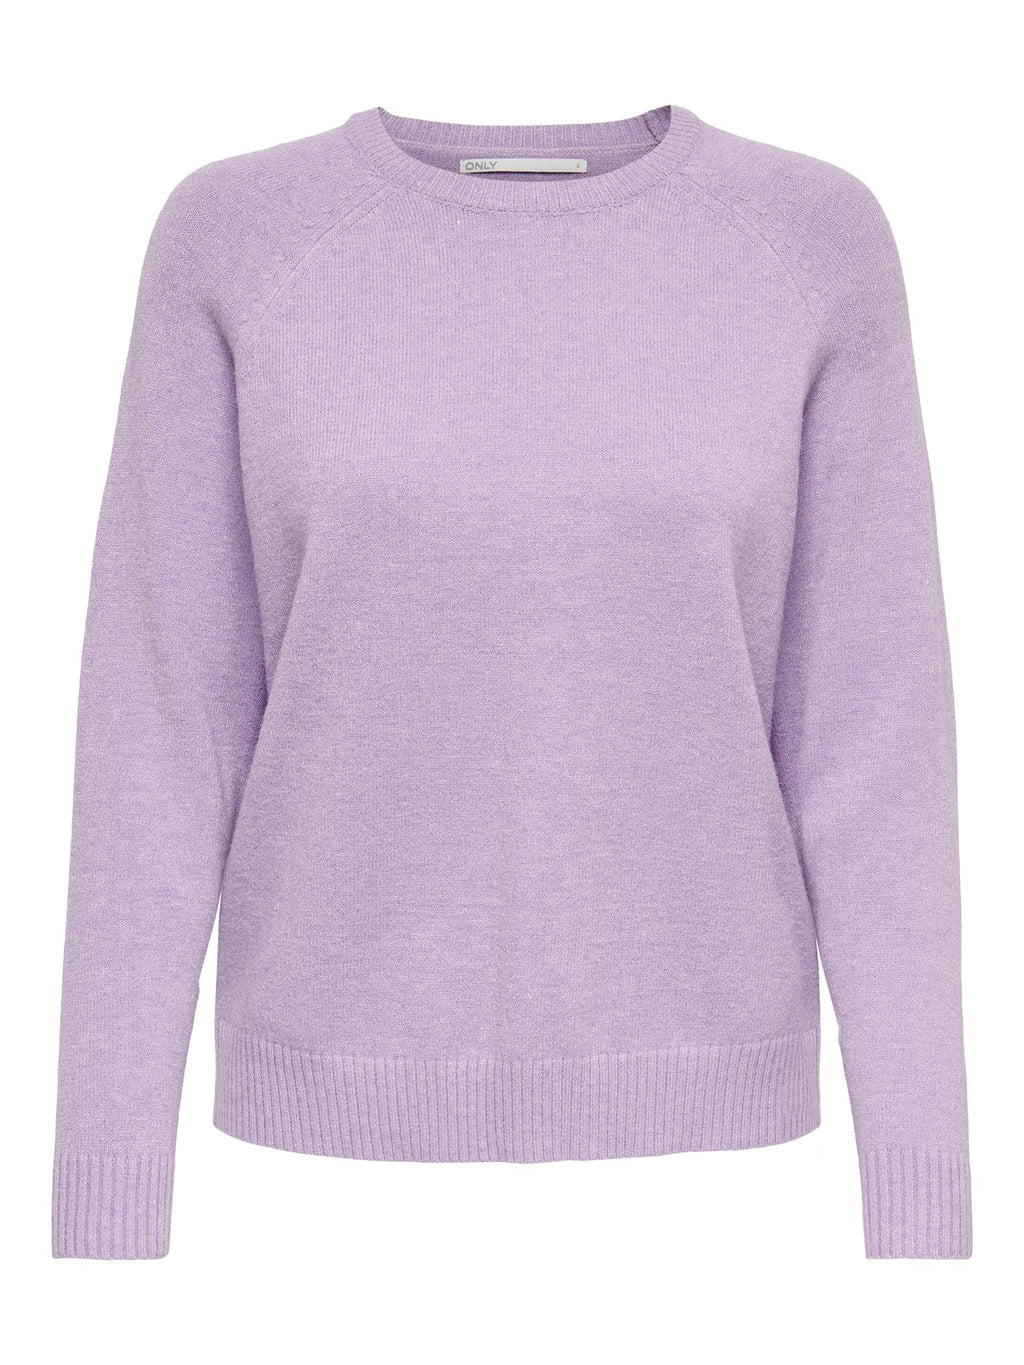 Soft Lesly Knit - Dewberry